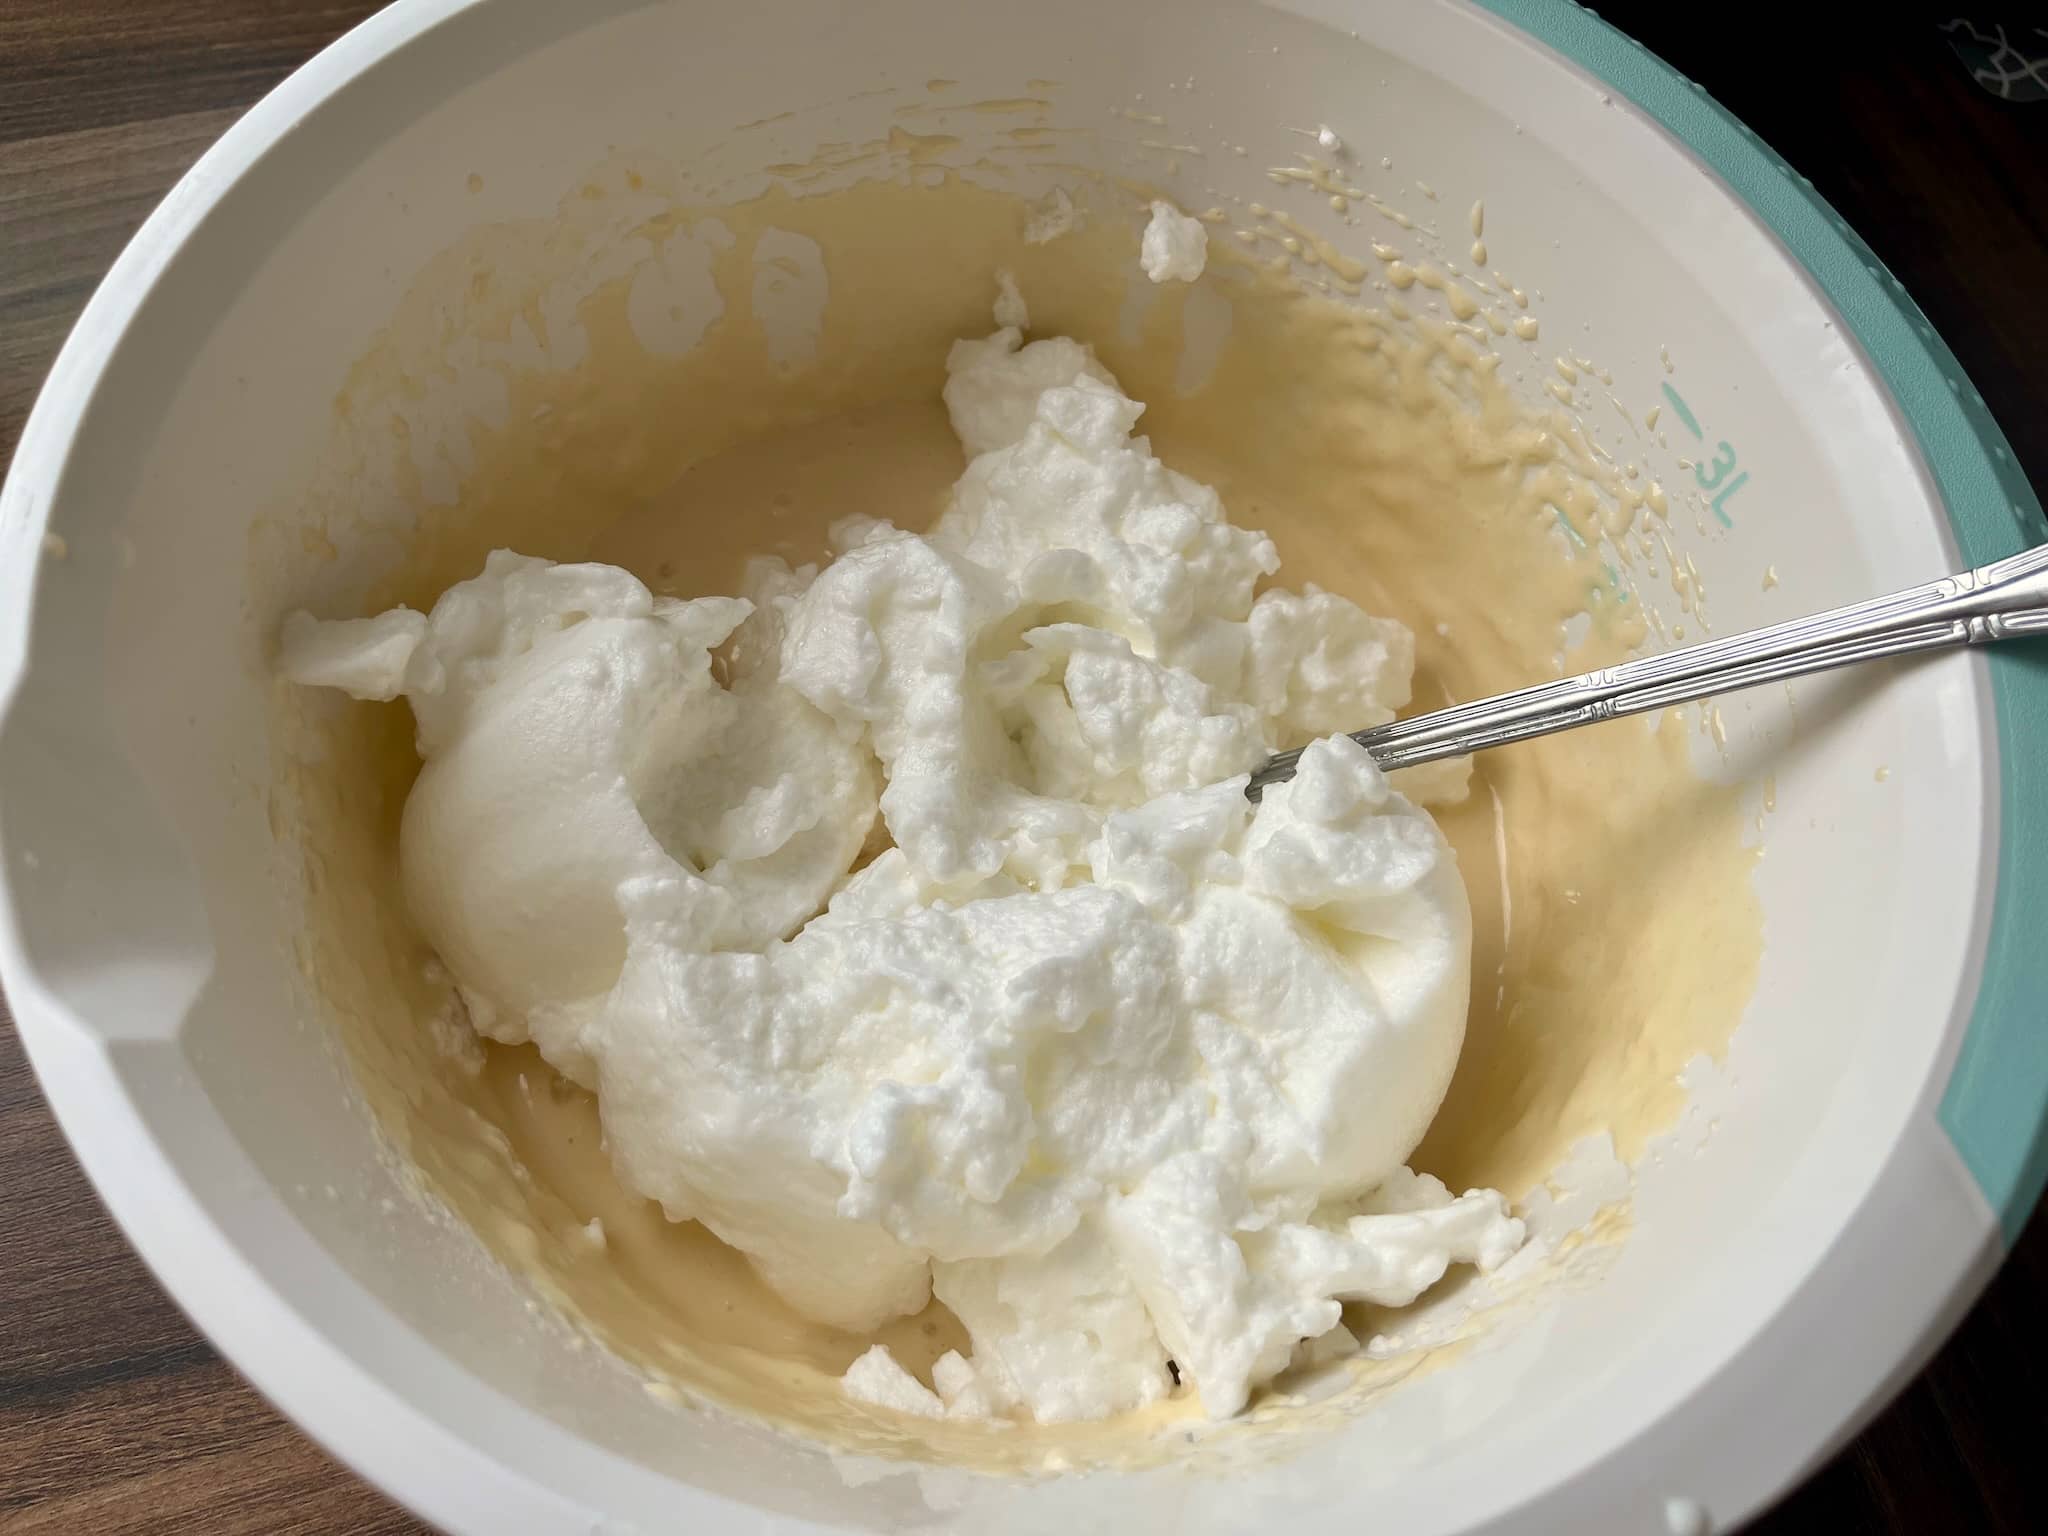 Stiff foam from wgg whites added to the waffle batter in a bowl